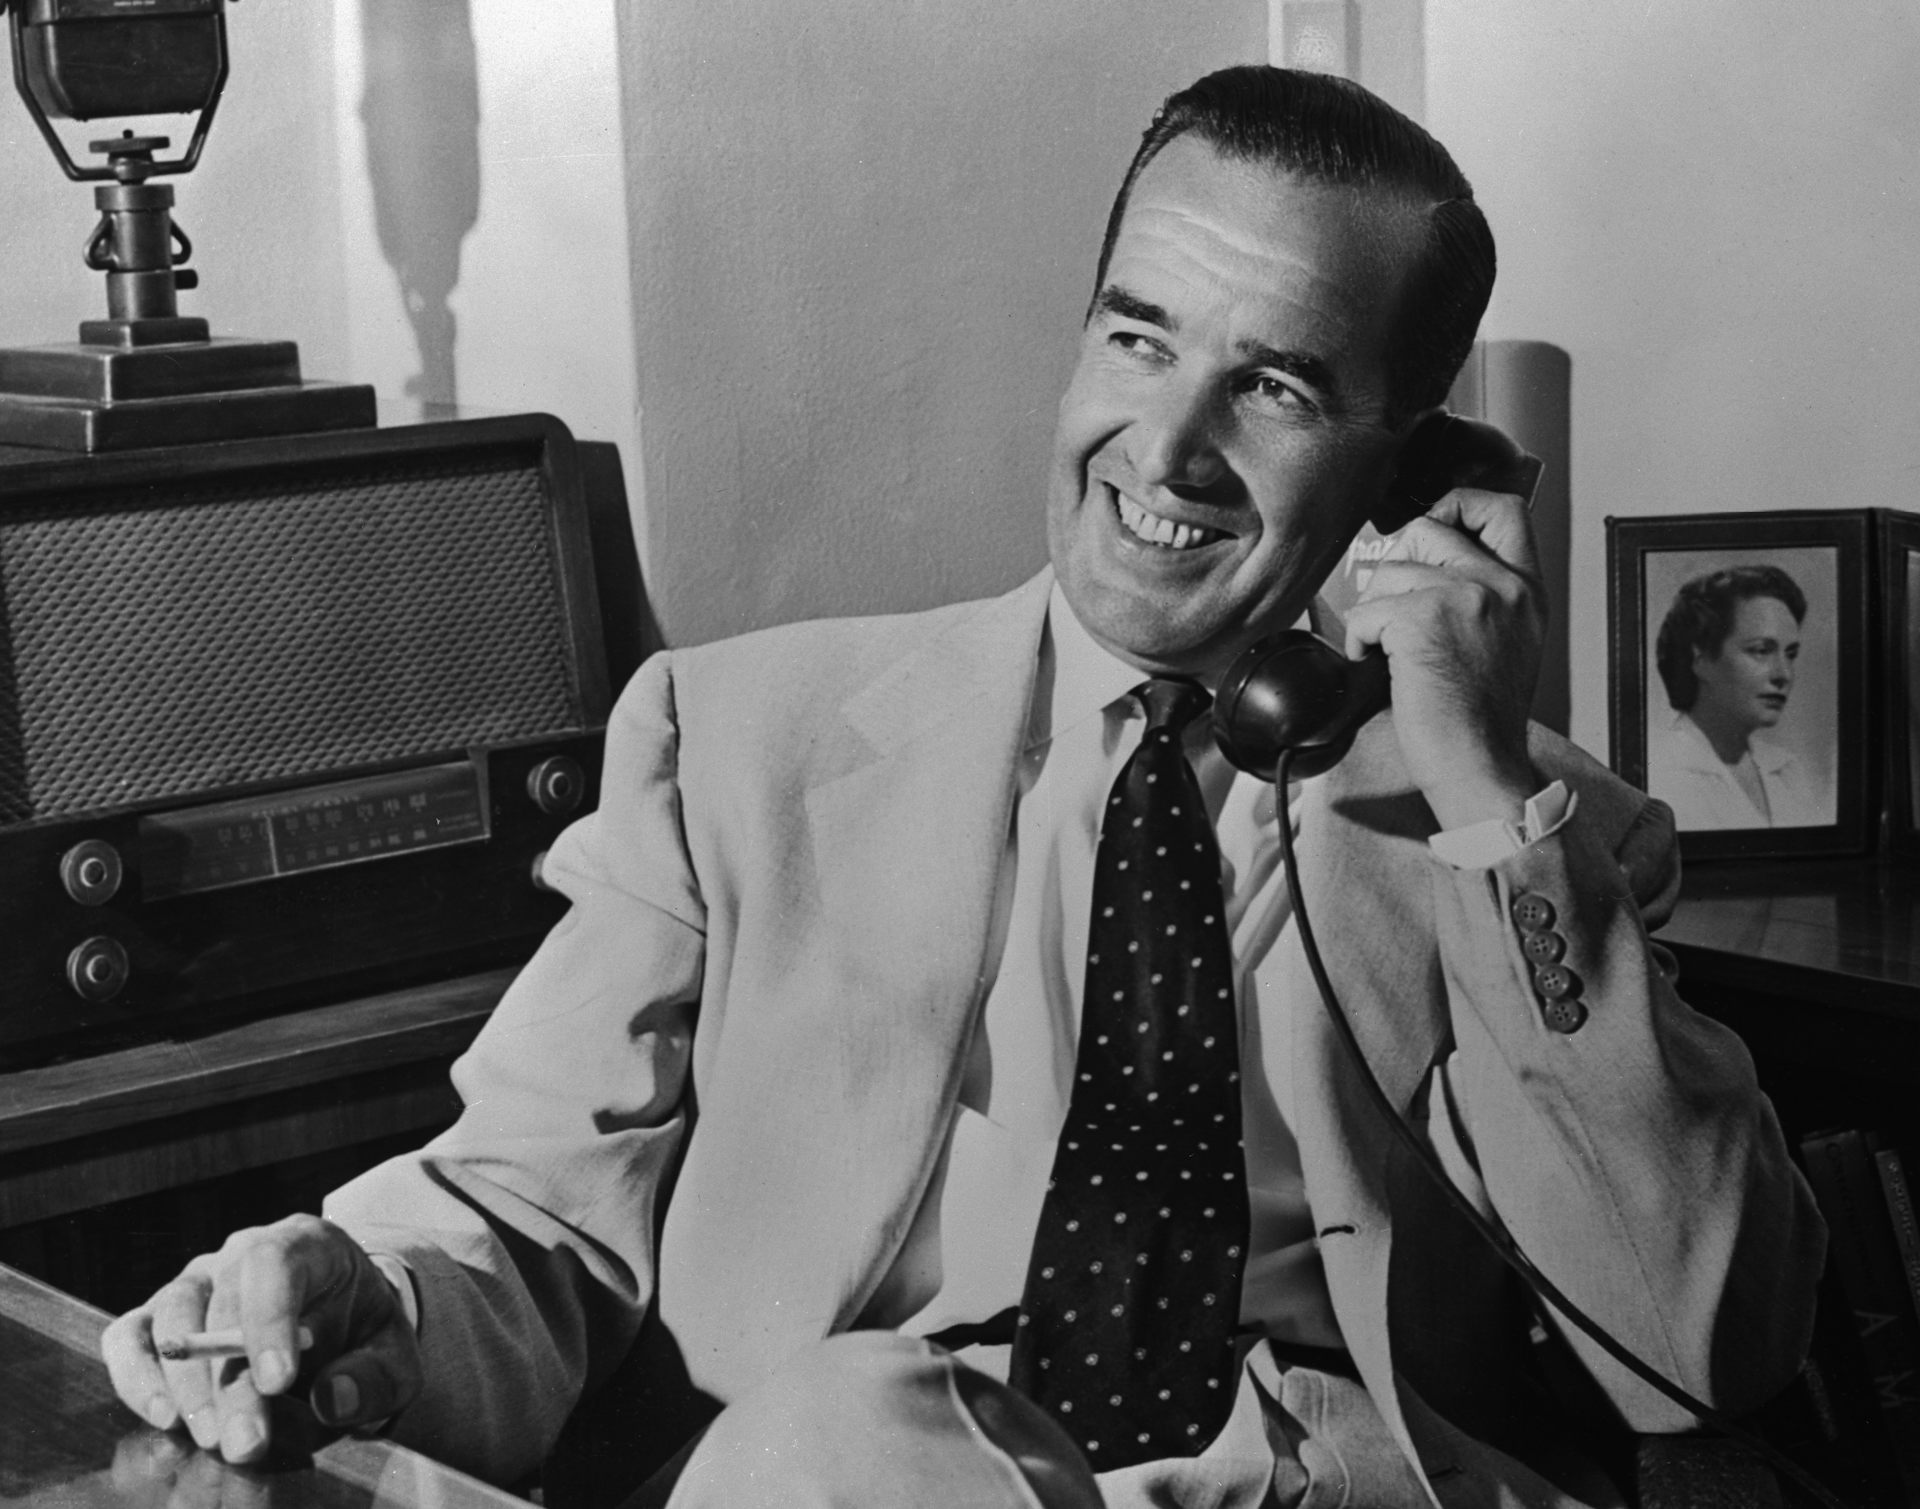 Though CBS legend Edward R. Murrow is given credit